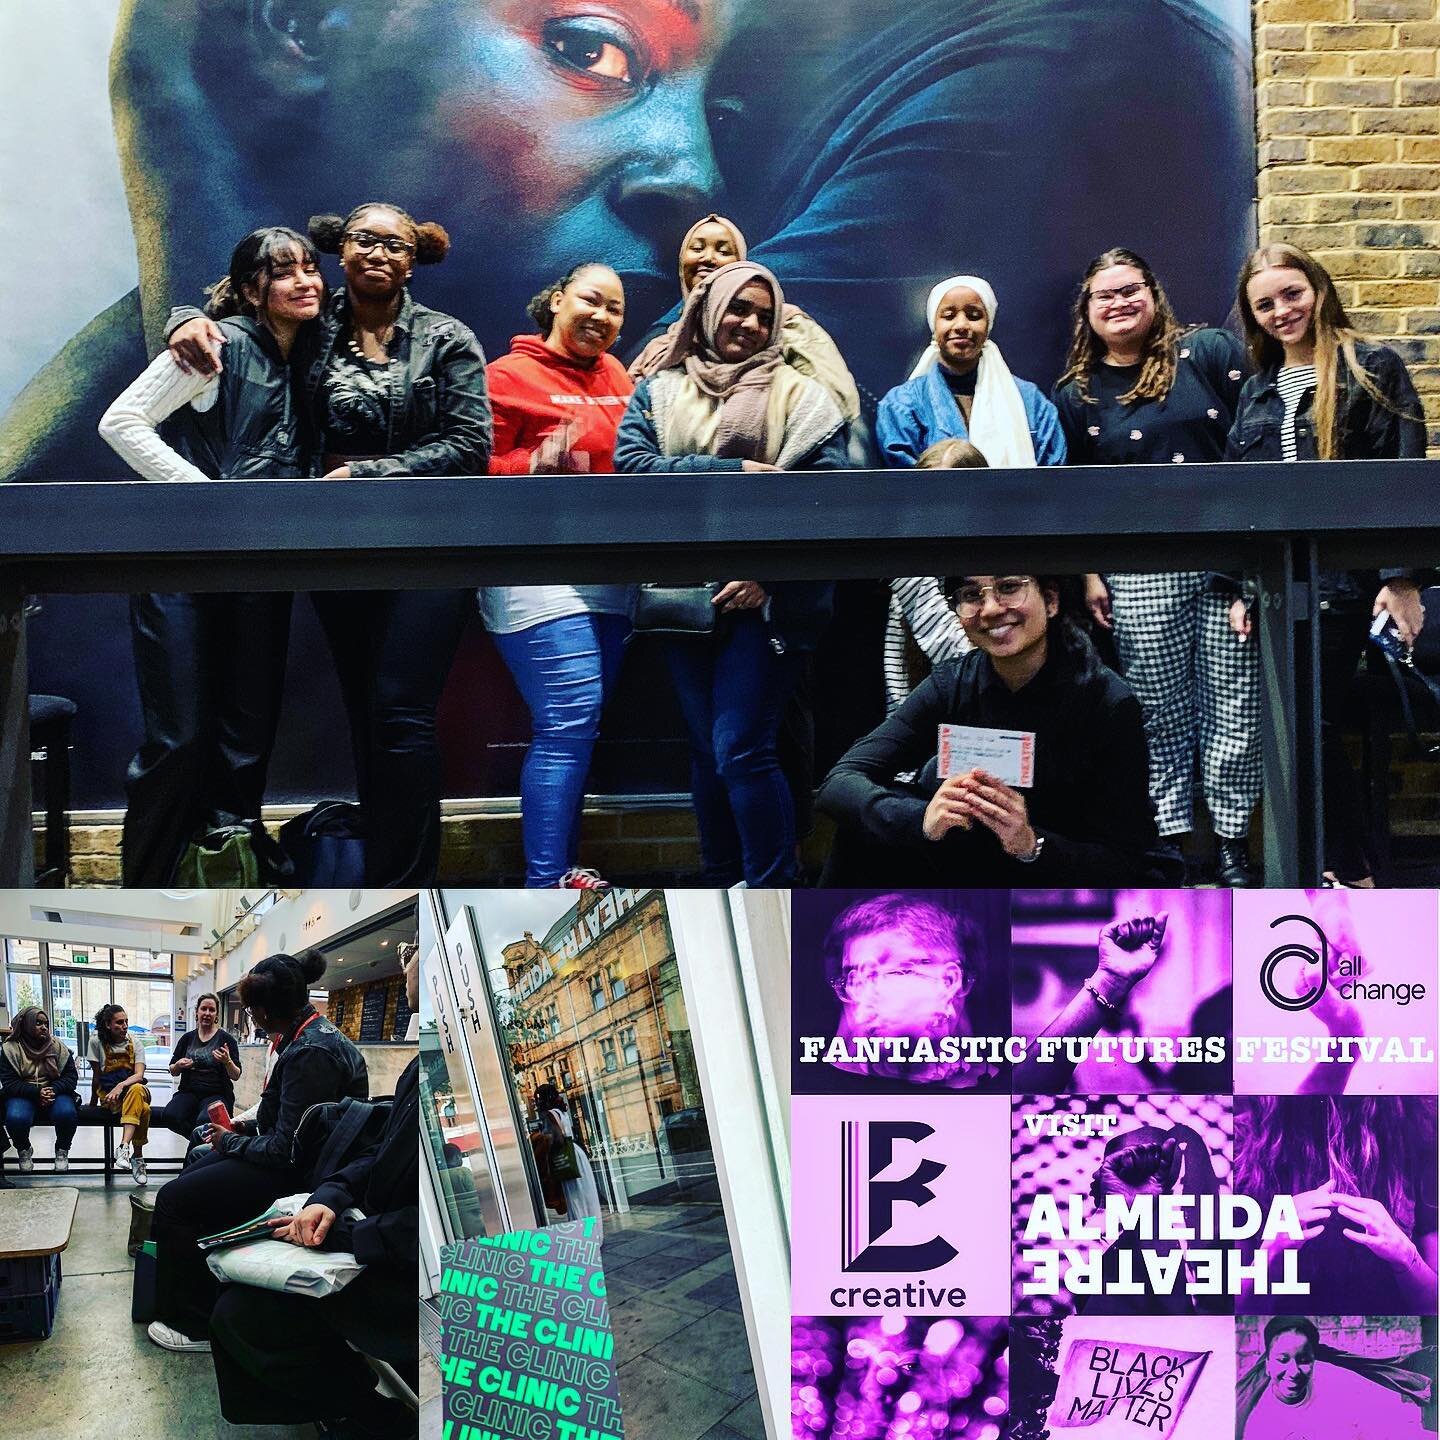 As part of our #FantasticFuturesFestival our @bprojectlondon young women enjoyed a wonderful visit to Almeida Theatre - with a pre-show Q&amp;A with women who work for Almeida followed by free tickets to see The Clinic by Dipo Baruwa-Etta

Thank you 